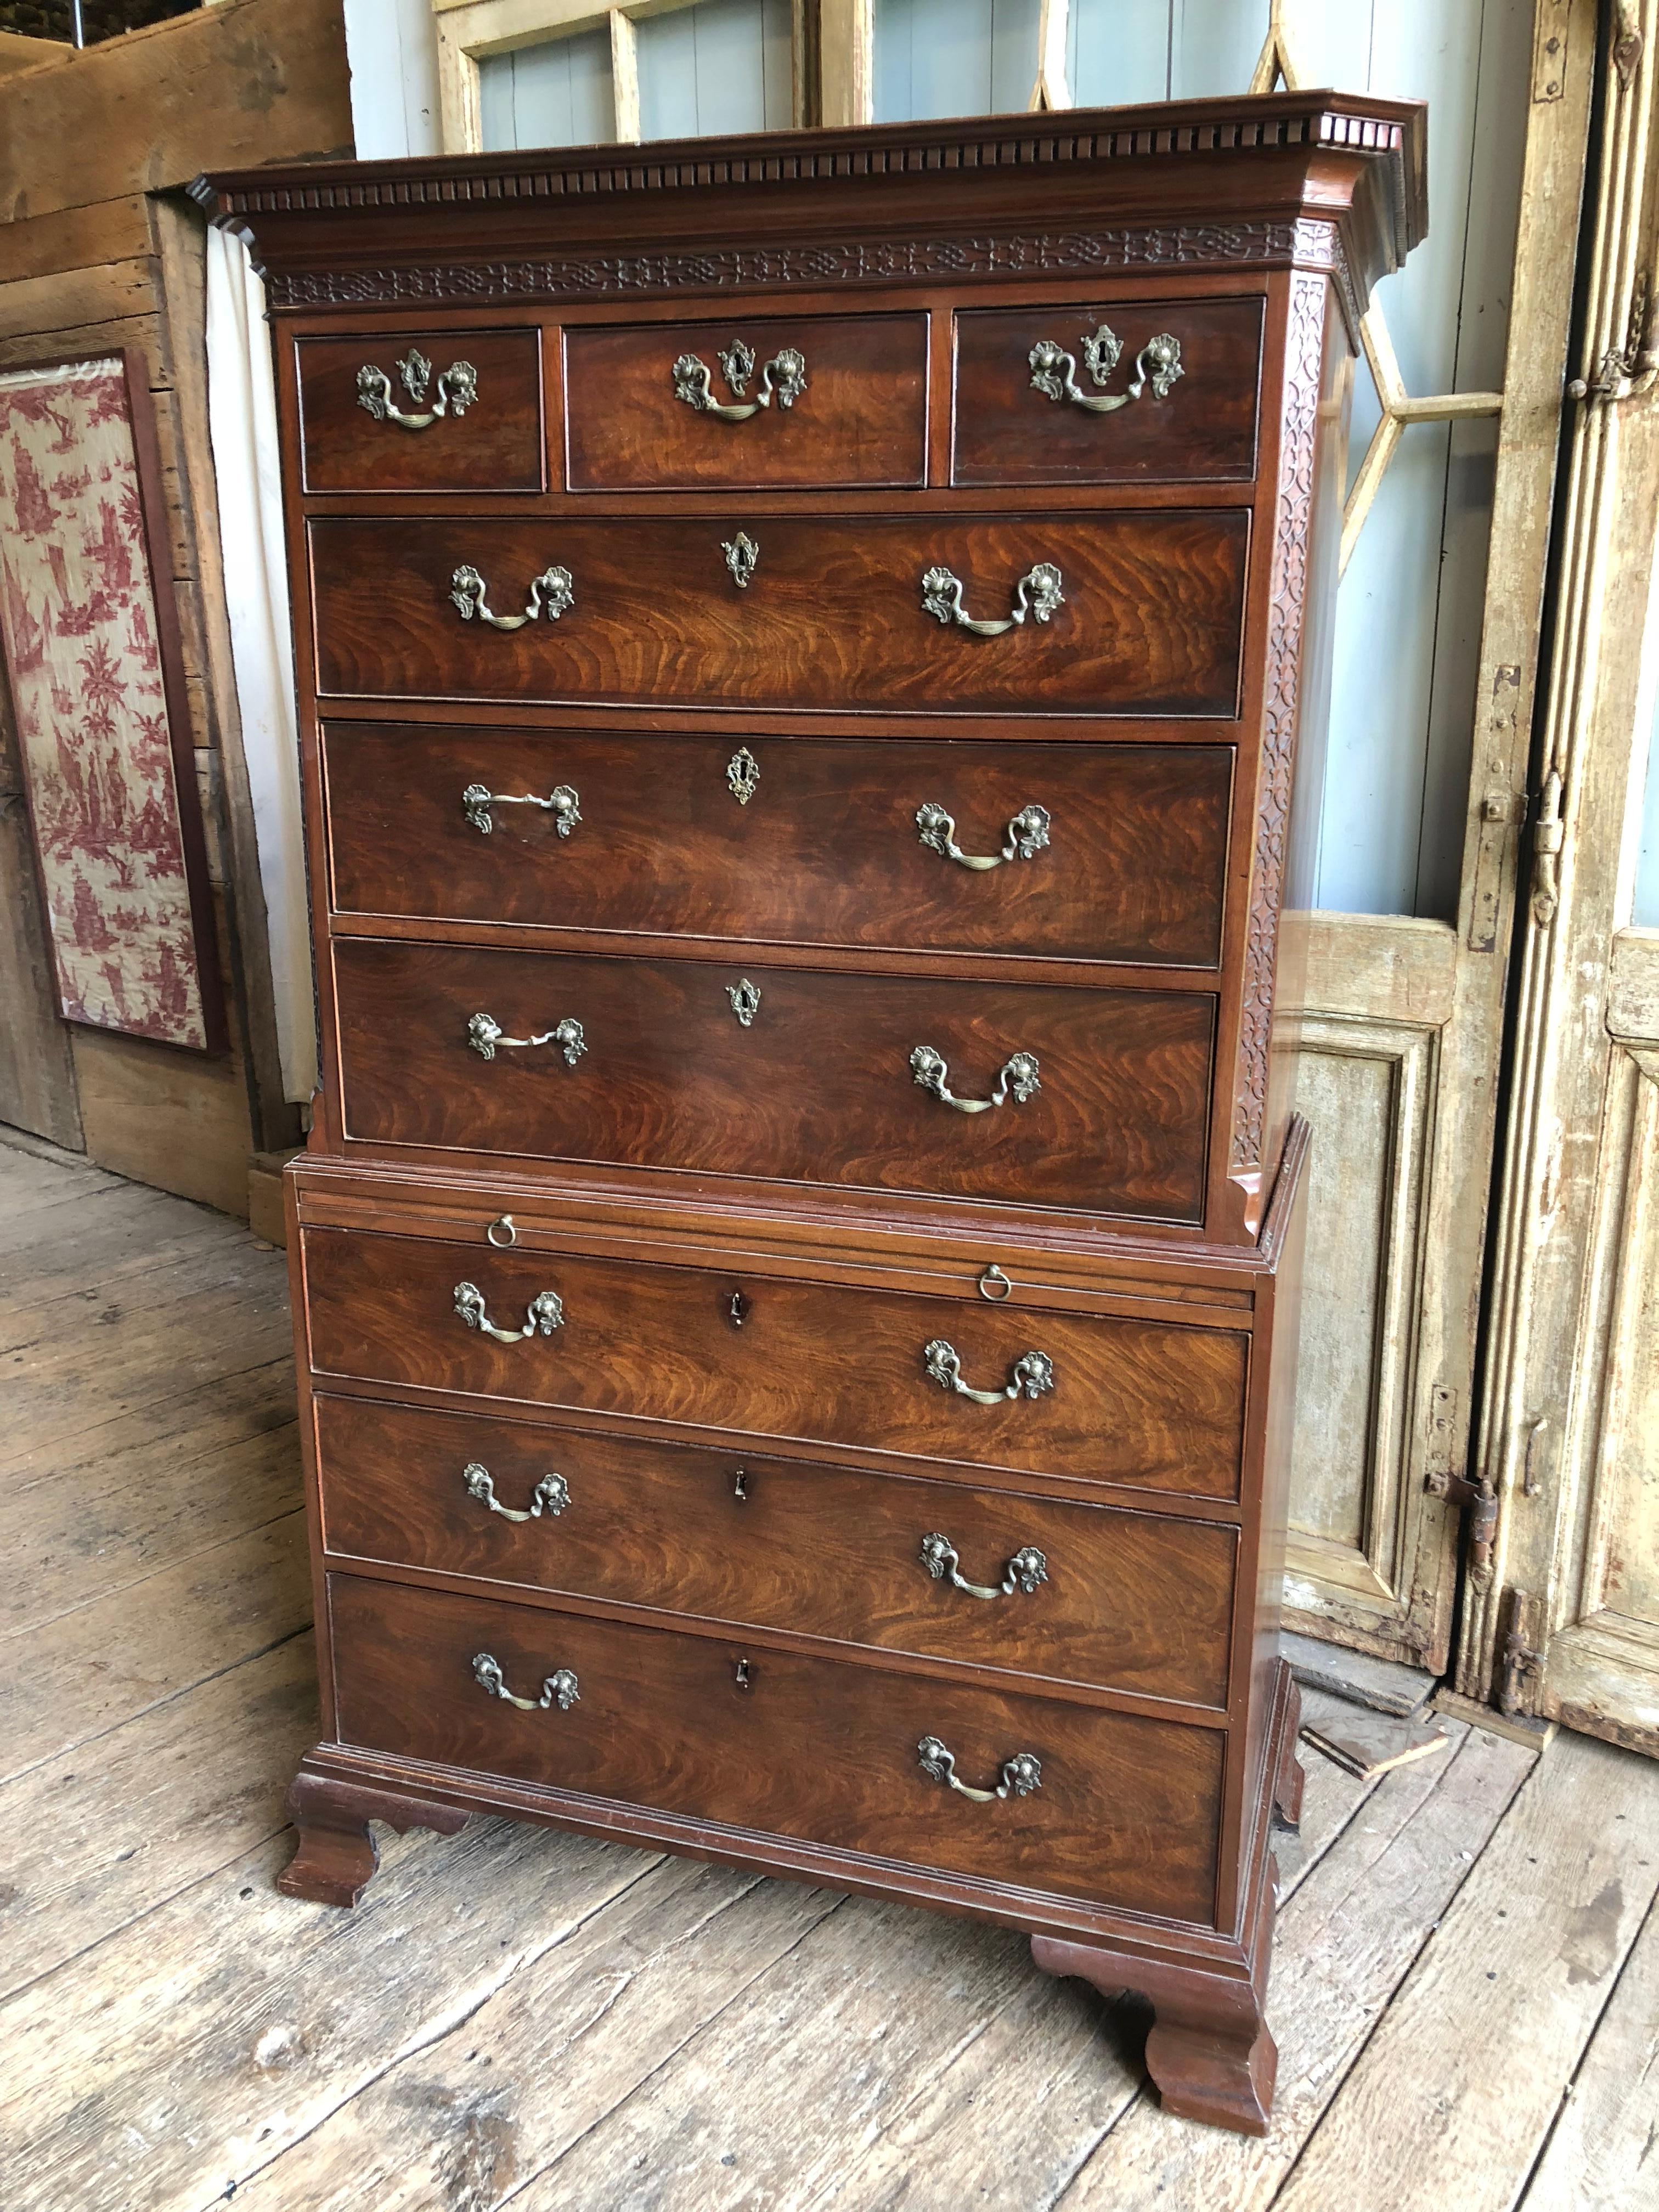 A fine English George III chest-on-chest highboy in mahogany with a dentil cornice and lattice decoration over three short drawers and three full-length drawers in the upper cabinet, the lower cabinet having a pull-out candle board over three full